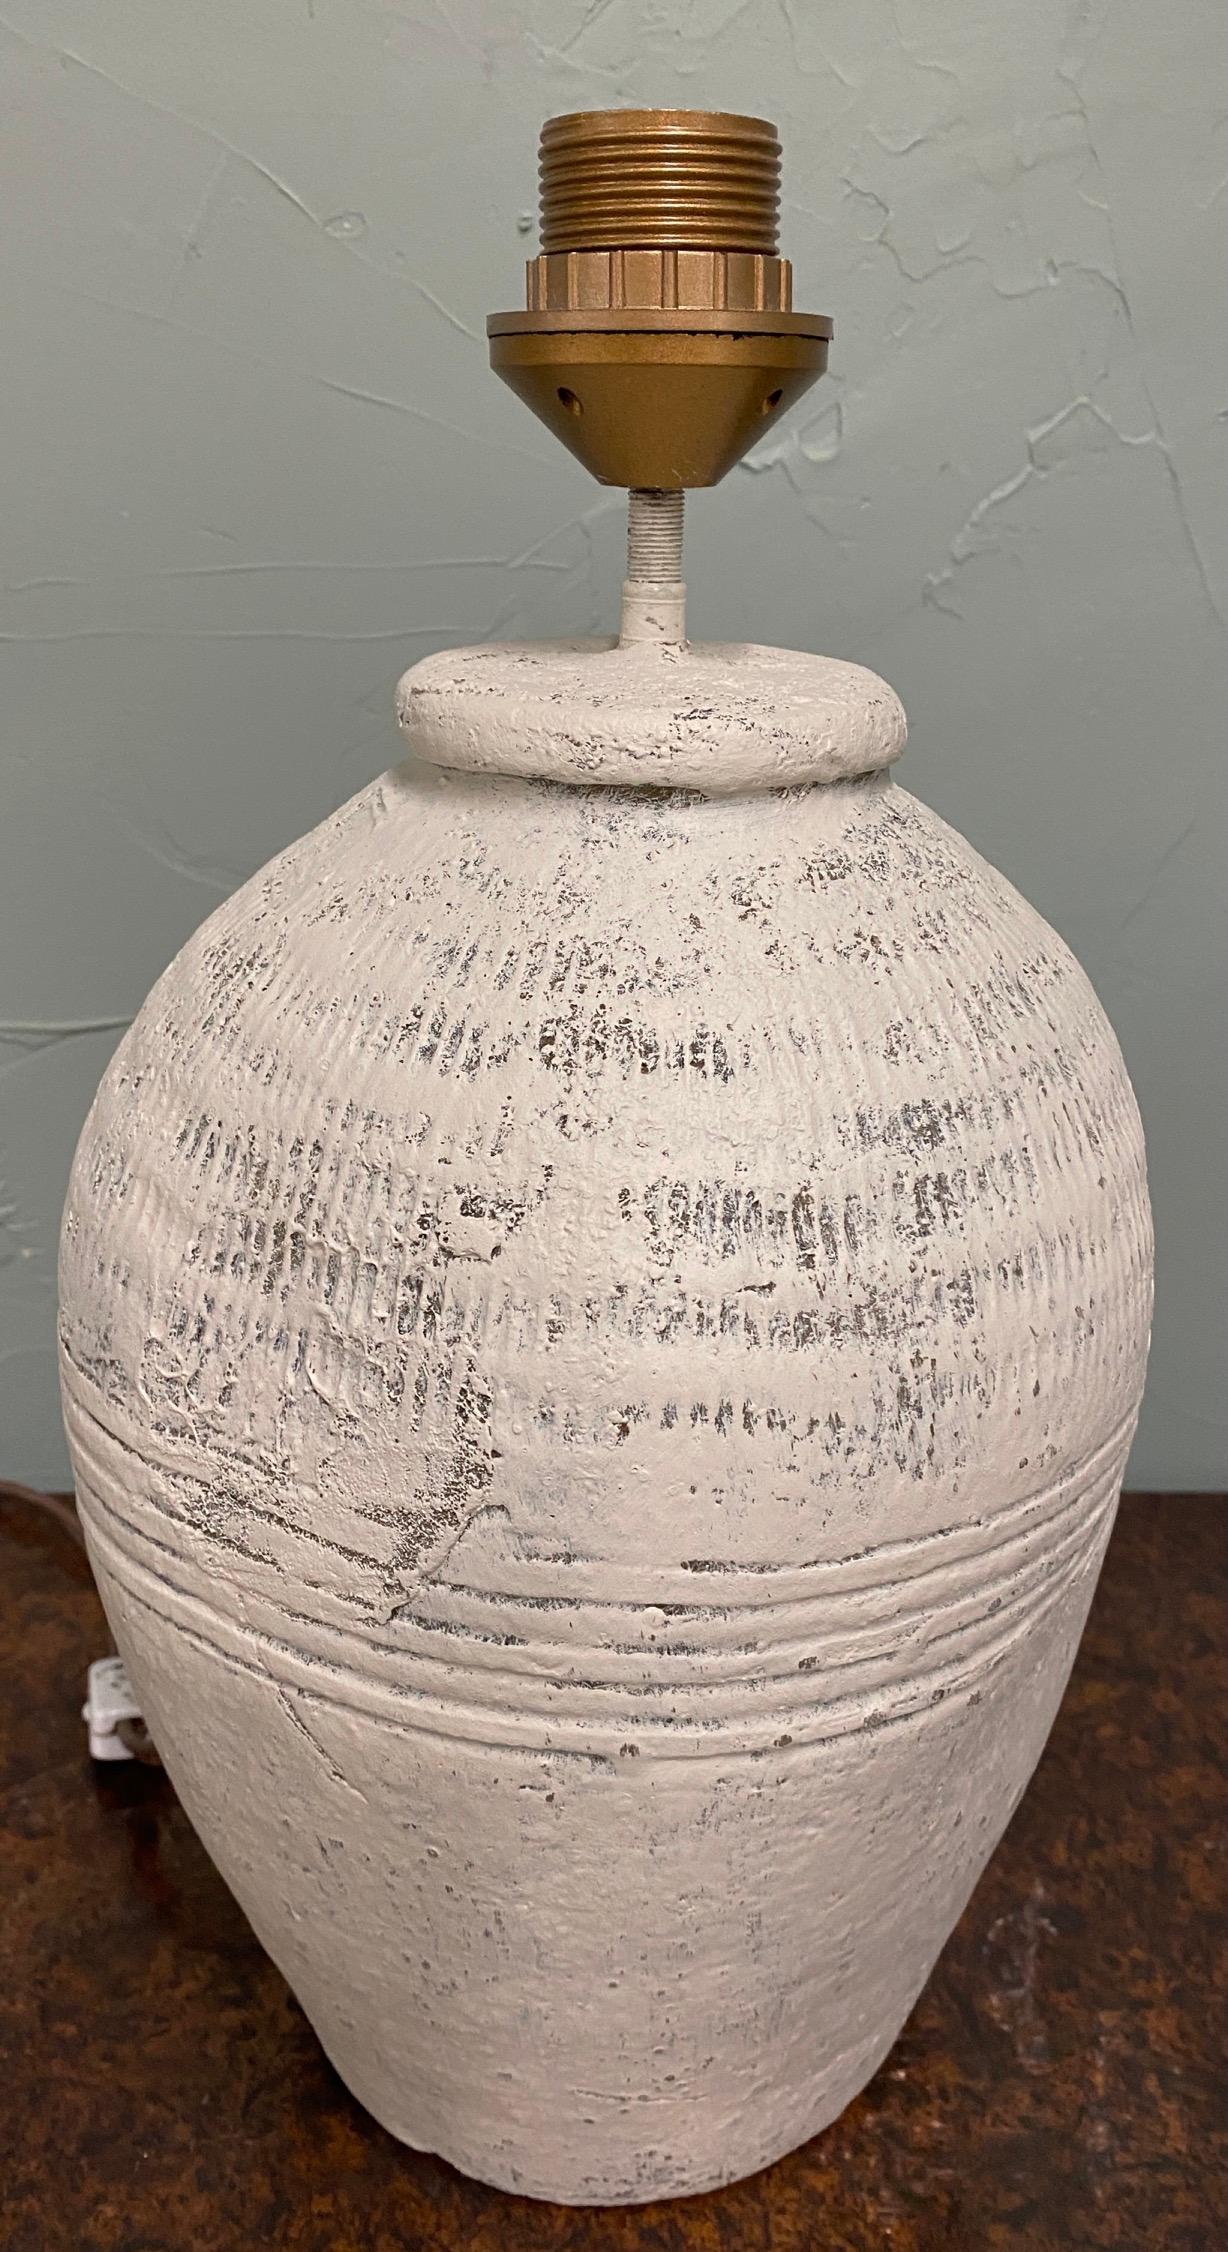 White painted, grey green terracotta lamp base made from rustic vintage Chinese clay jars used for wine storage. The lamp is hand made and was not intended for decorative use. The jar is somewhat misshapen, again because these jars in general had